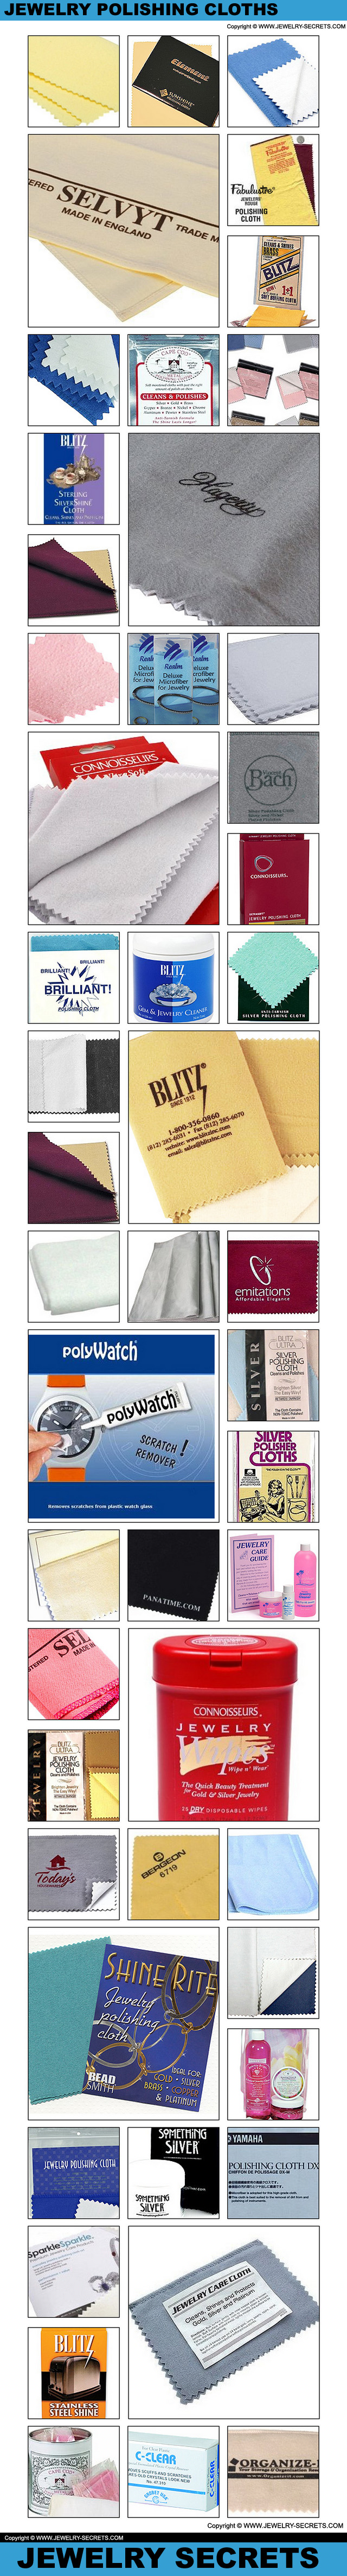 The Best Jewelry Polishing Cloths for Jewelry Gold Silver